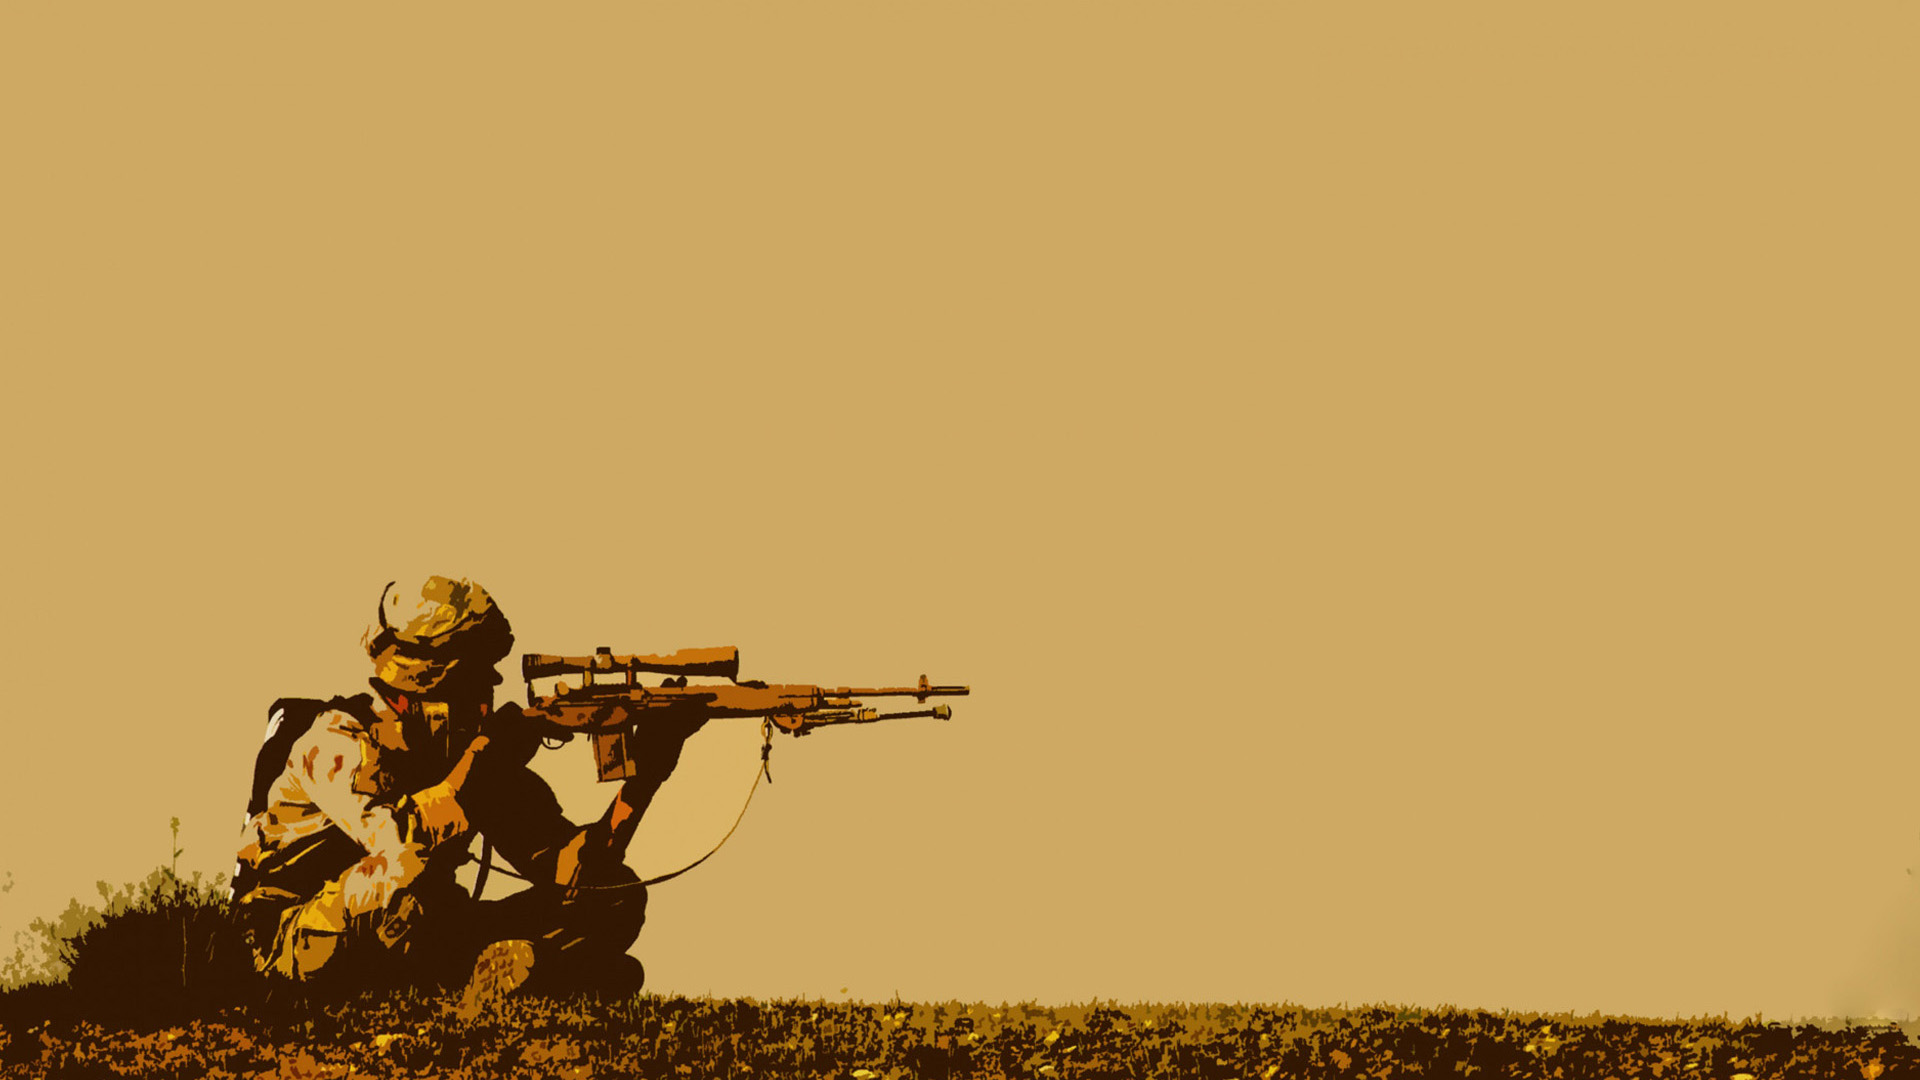 Cool Army Wallpaper In HD For